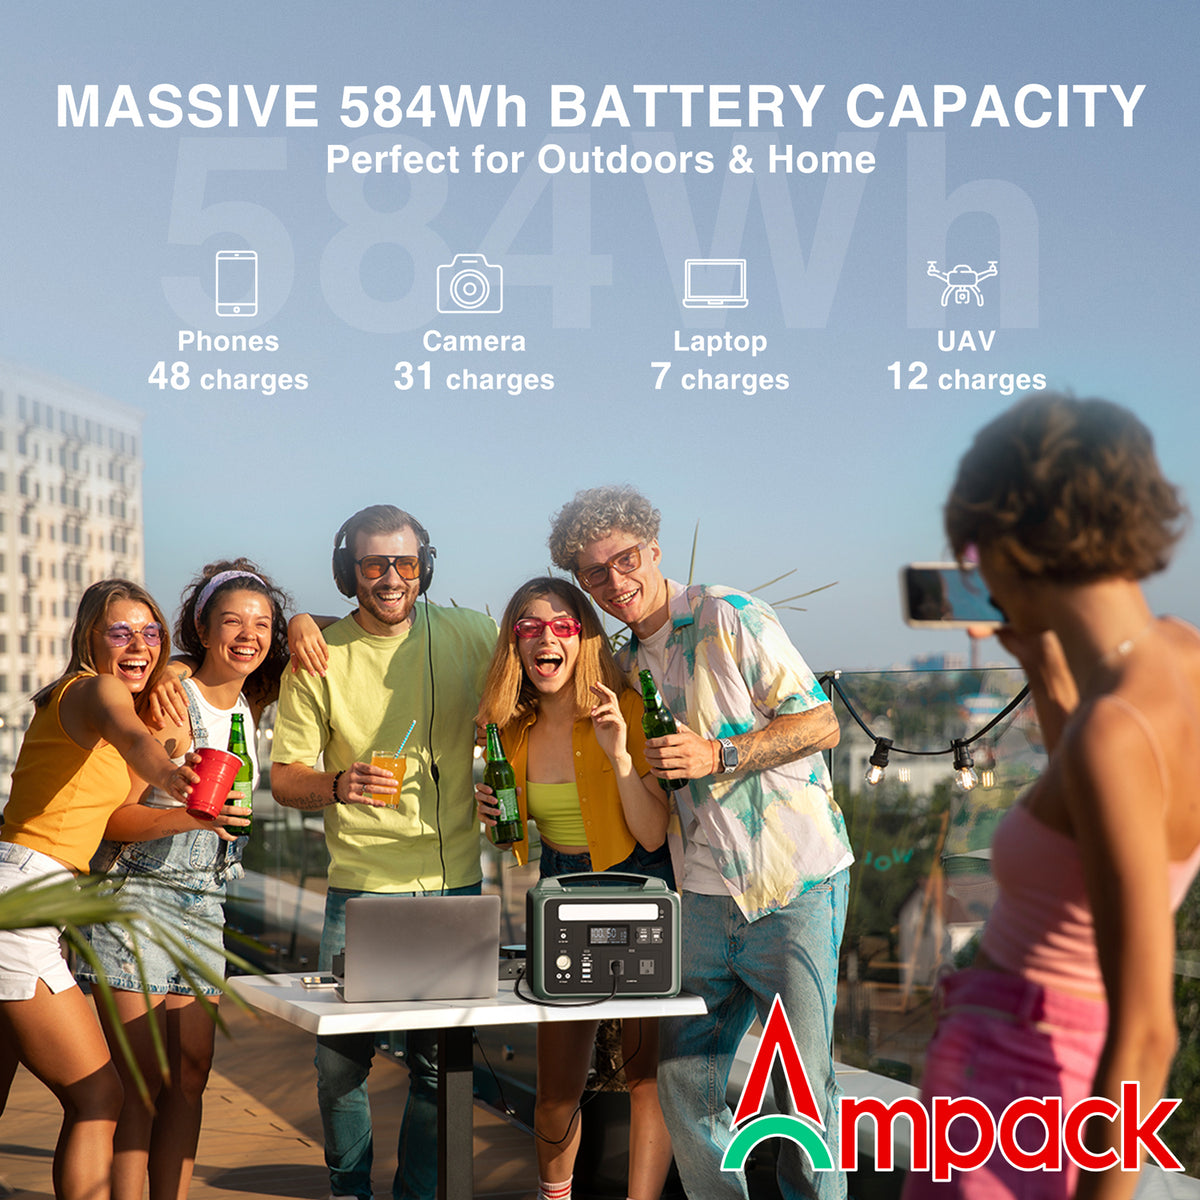 Ampack Portable Power Station 584Wh, 600W (Peak 1800W) 2*AC Outlets, Ampace Jumper Cable Car Starter (Not Included), Lithium Battery Solar Generator for Home Backup, Outdoor Camping, RVs, Emergency, CPAP